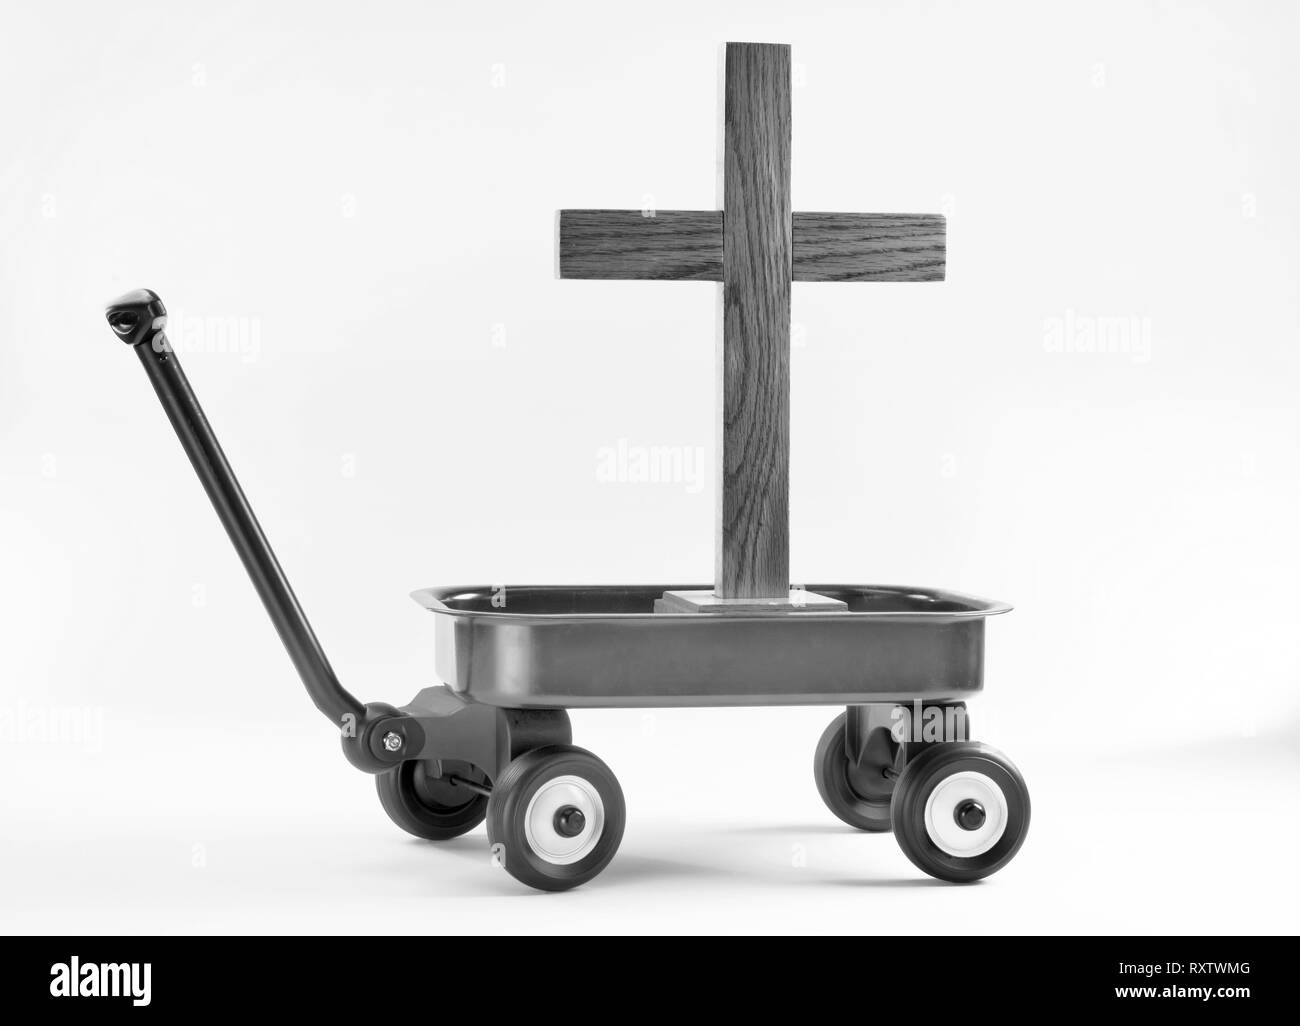 Hauling the old wooden cross in a little red wagon in black and white. Stock Photo